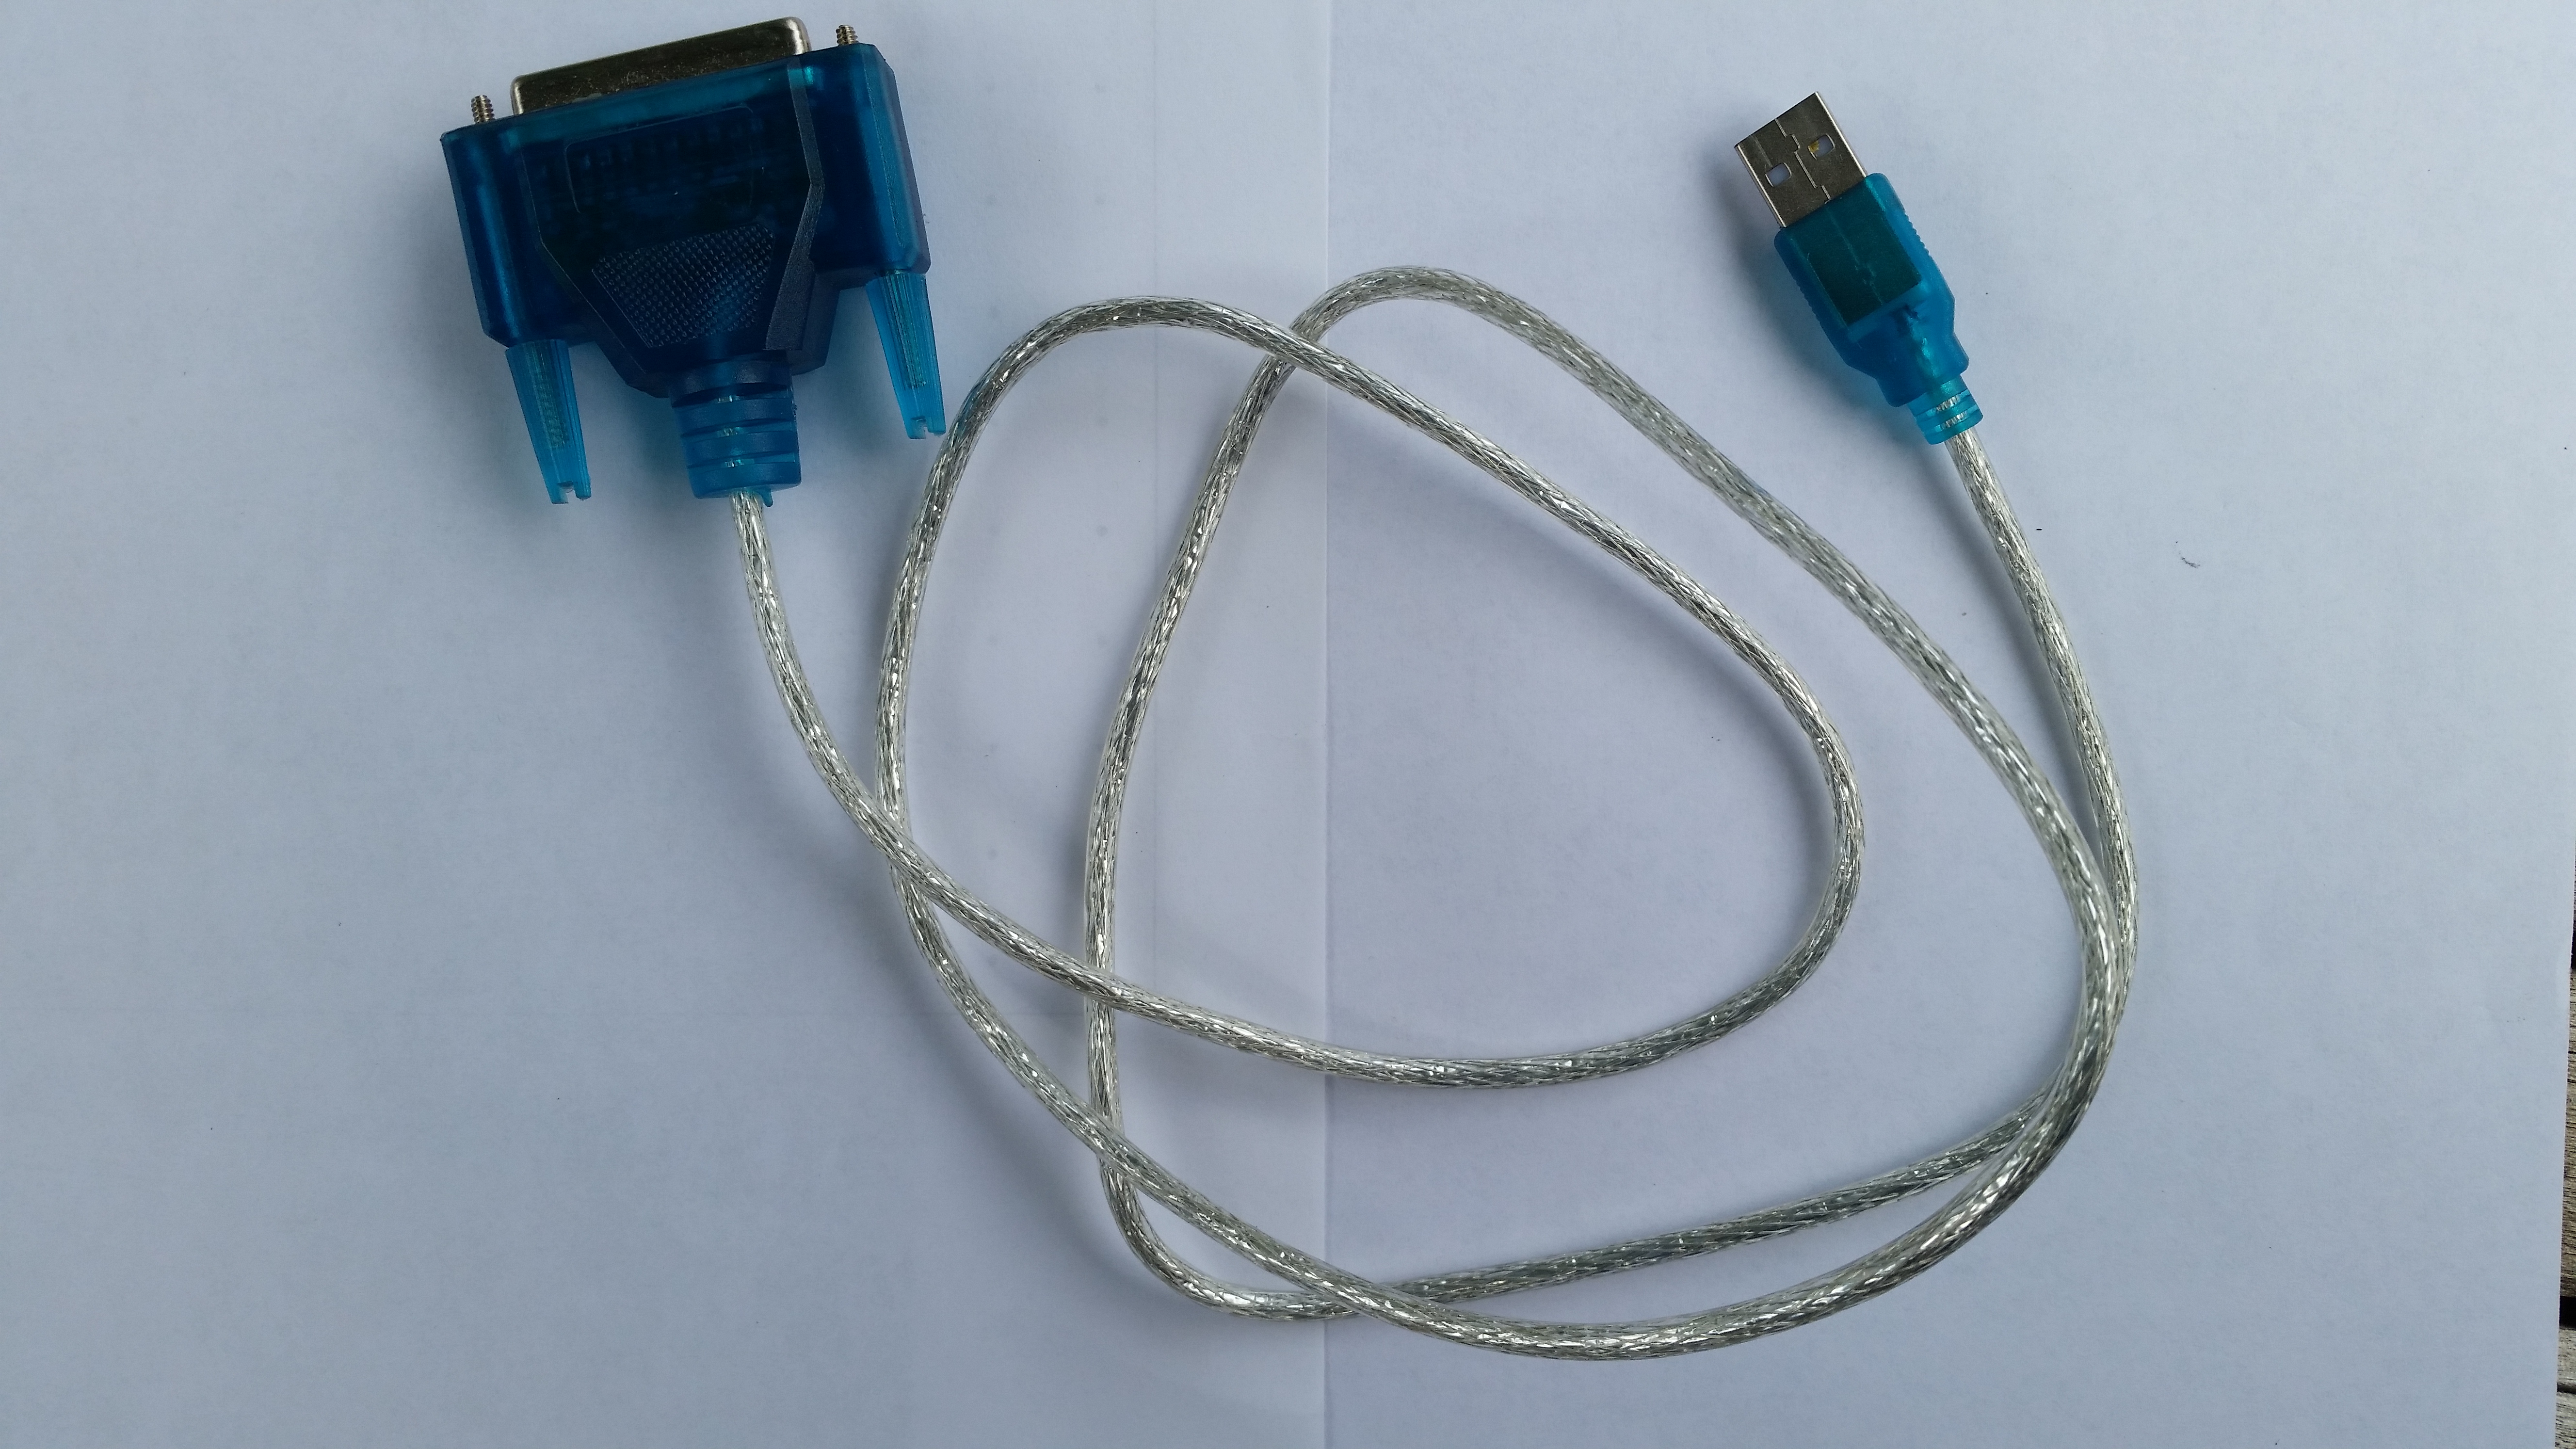 USB to Parallel Port